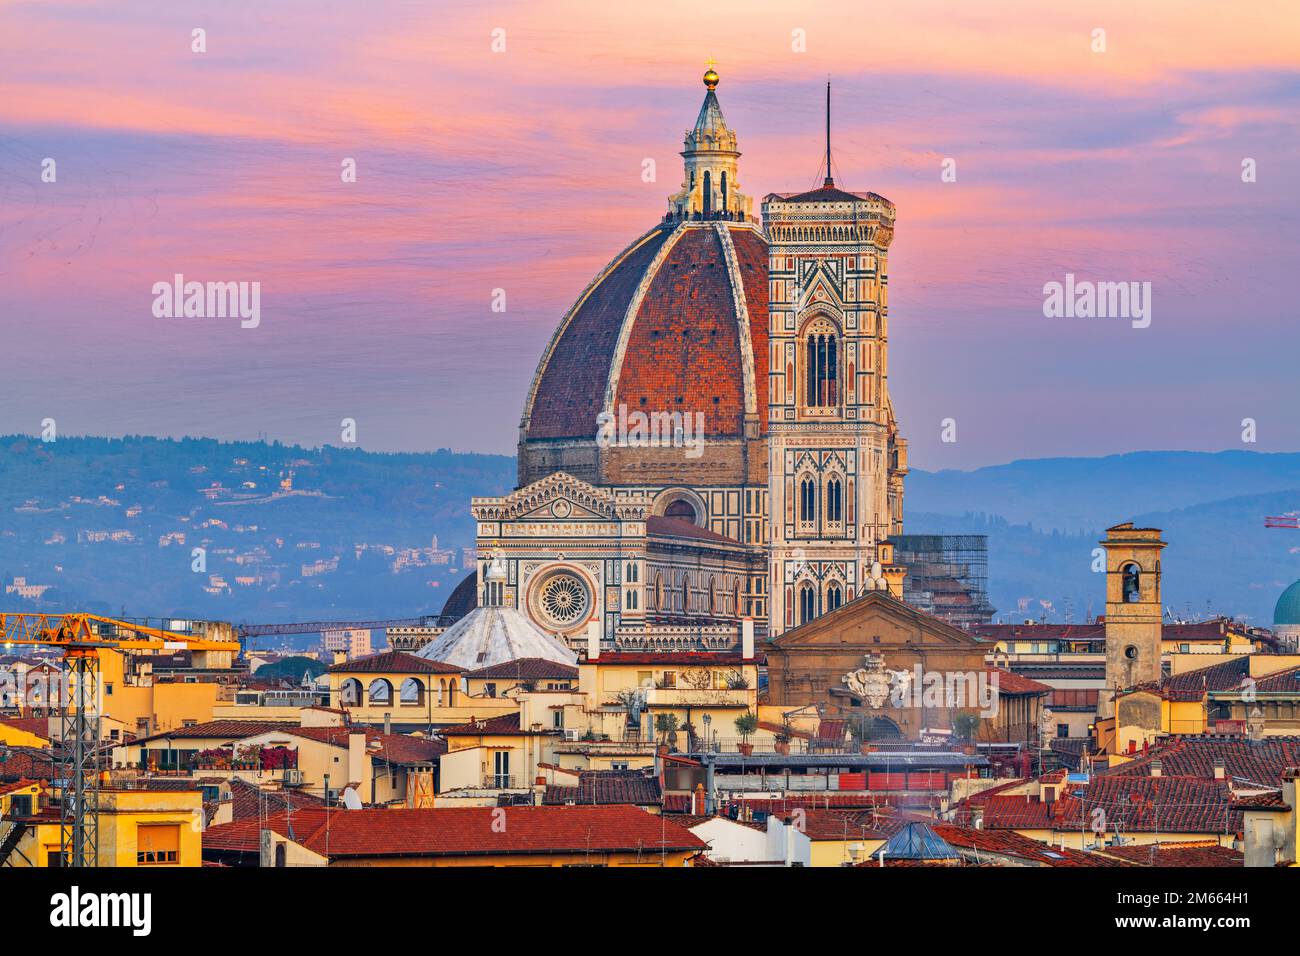 Florence, Italy skyline with landmark buildings of the Duomo at dusk. Stock Photo